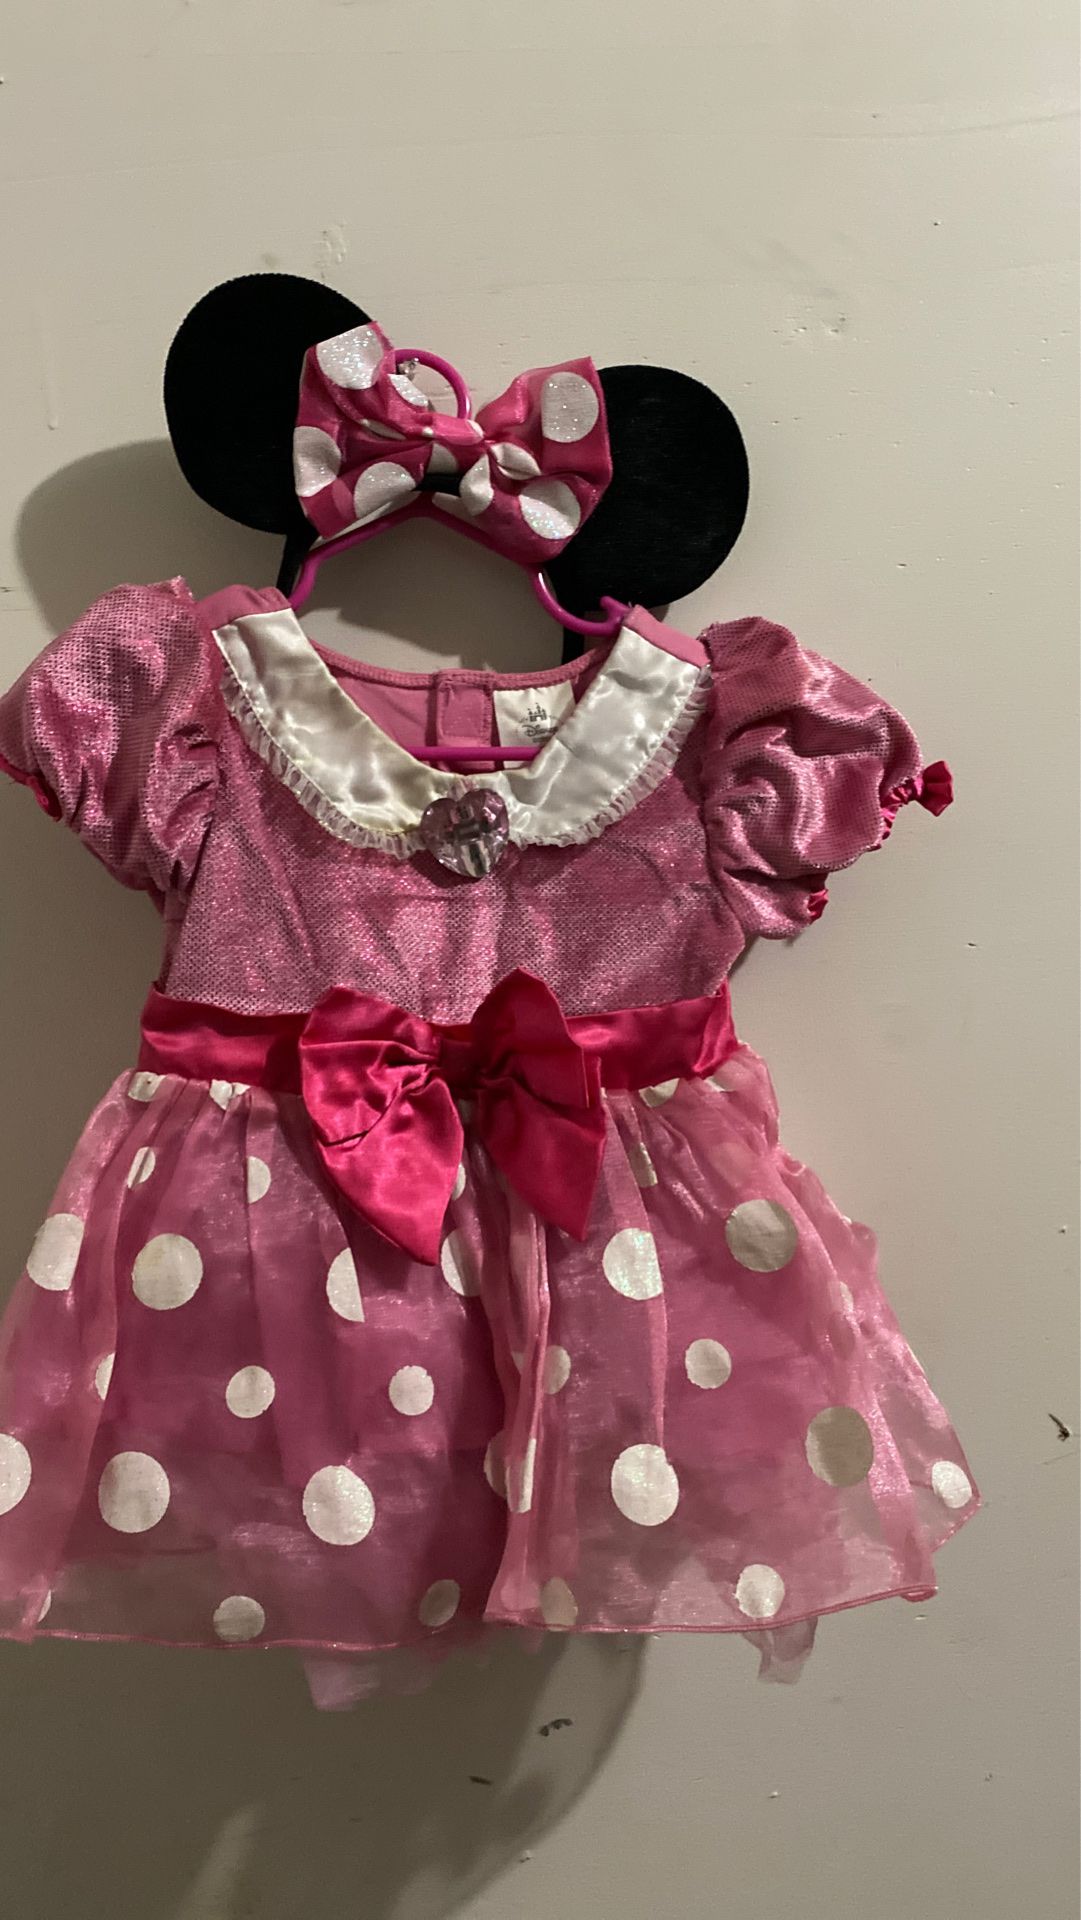 Minnie Mouse Halloween costume wi to 2 sets of ears